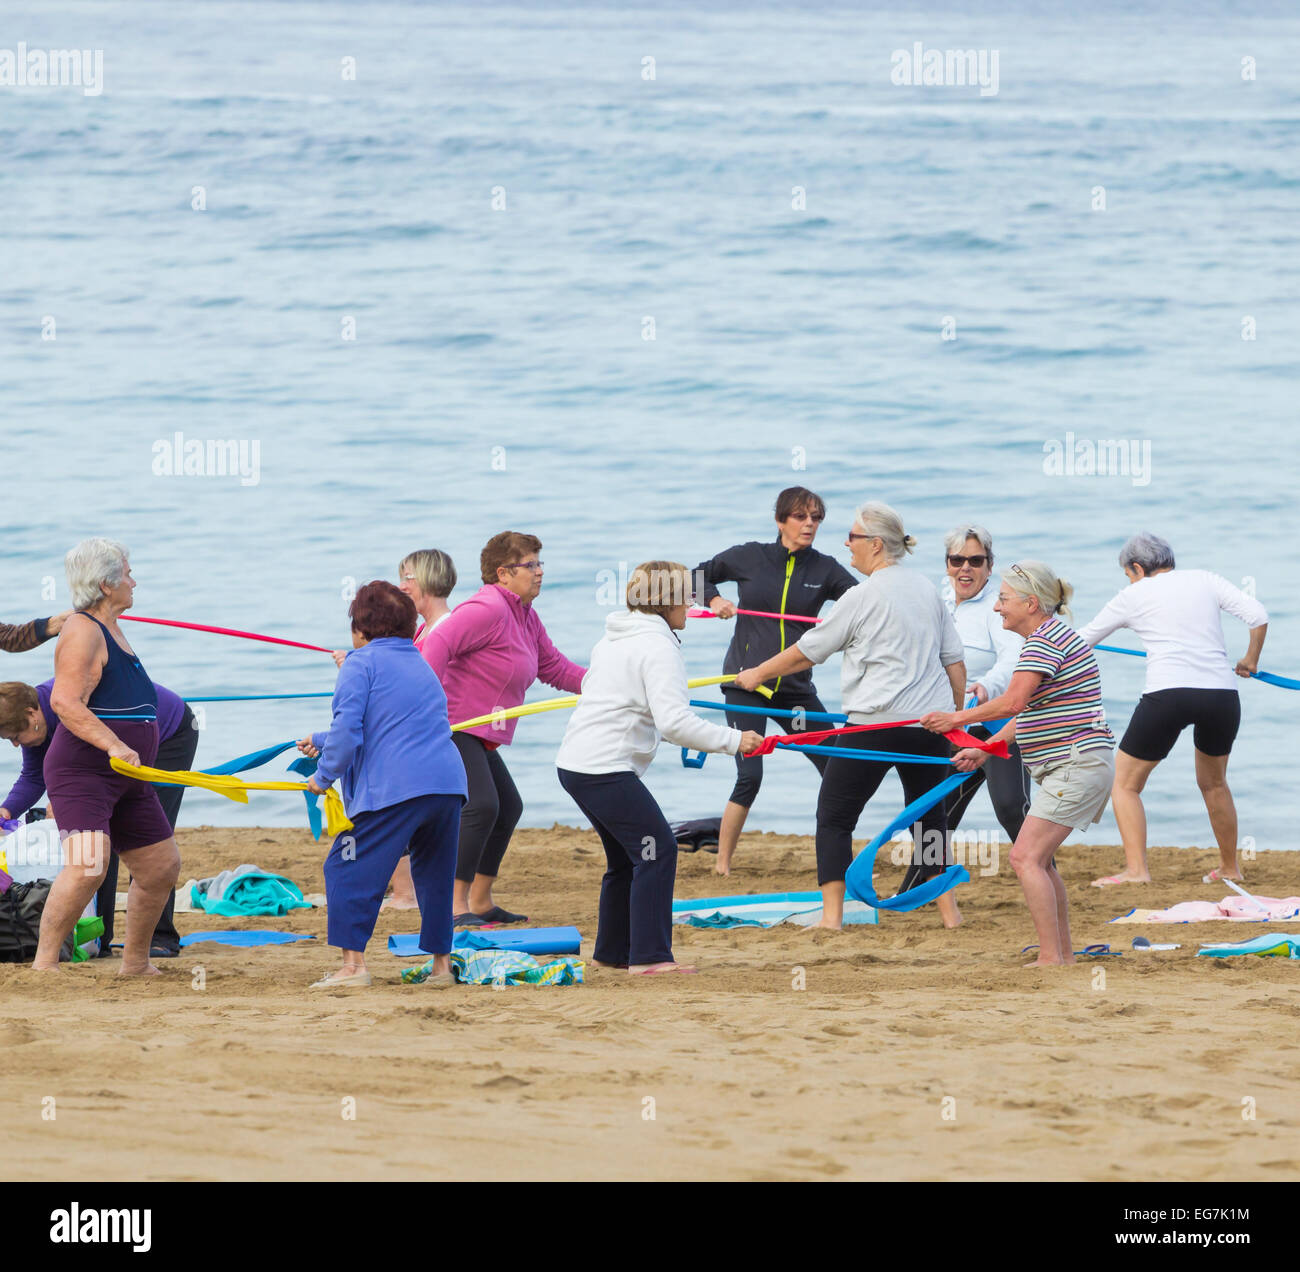 Elderly women using elastic resistance bands during daily exercise class on beach in Spain Stock Photo